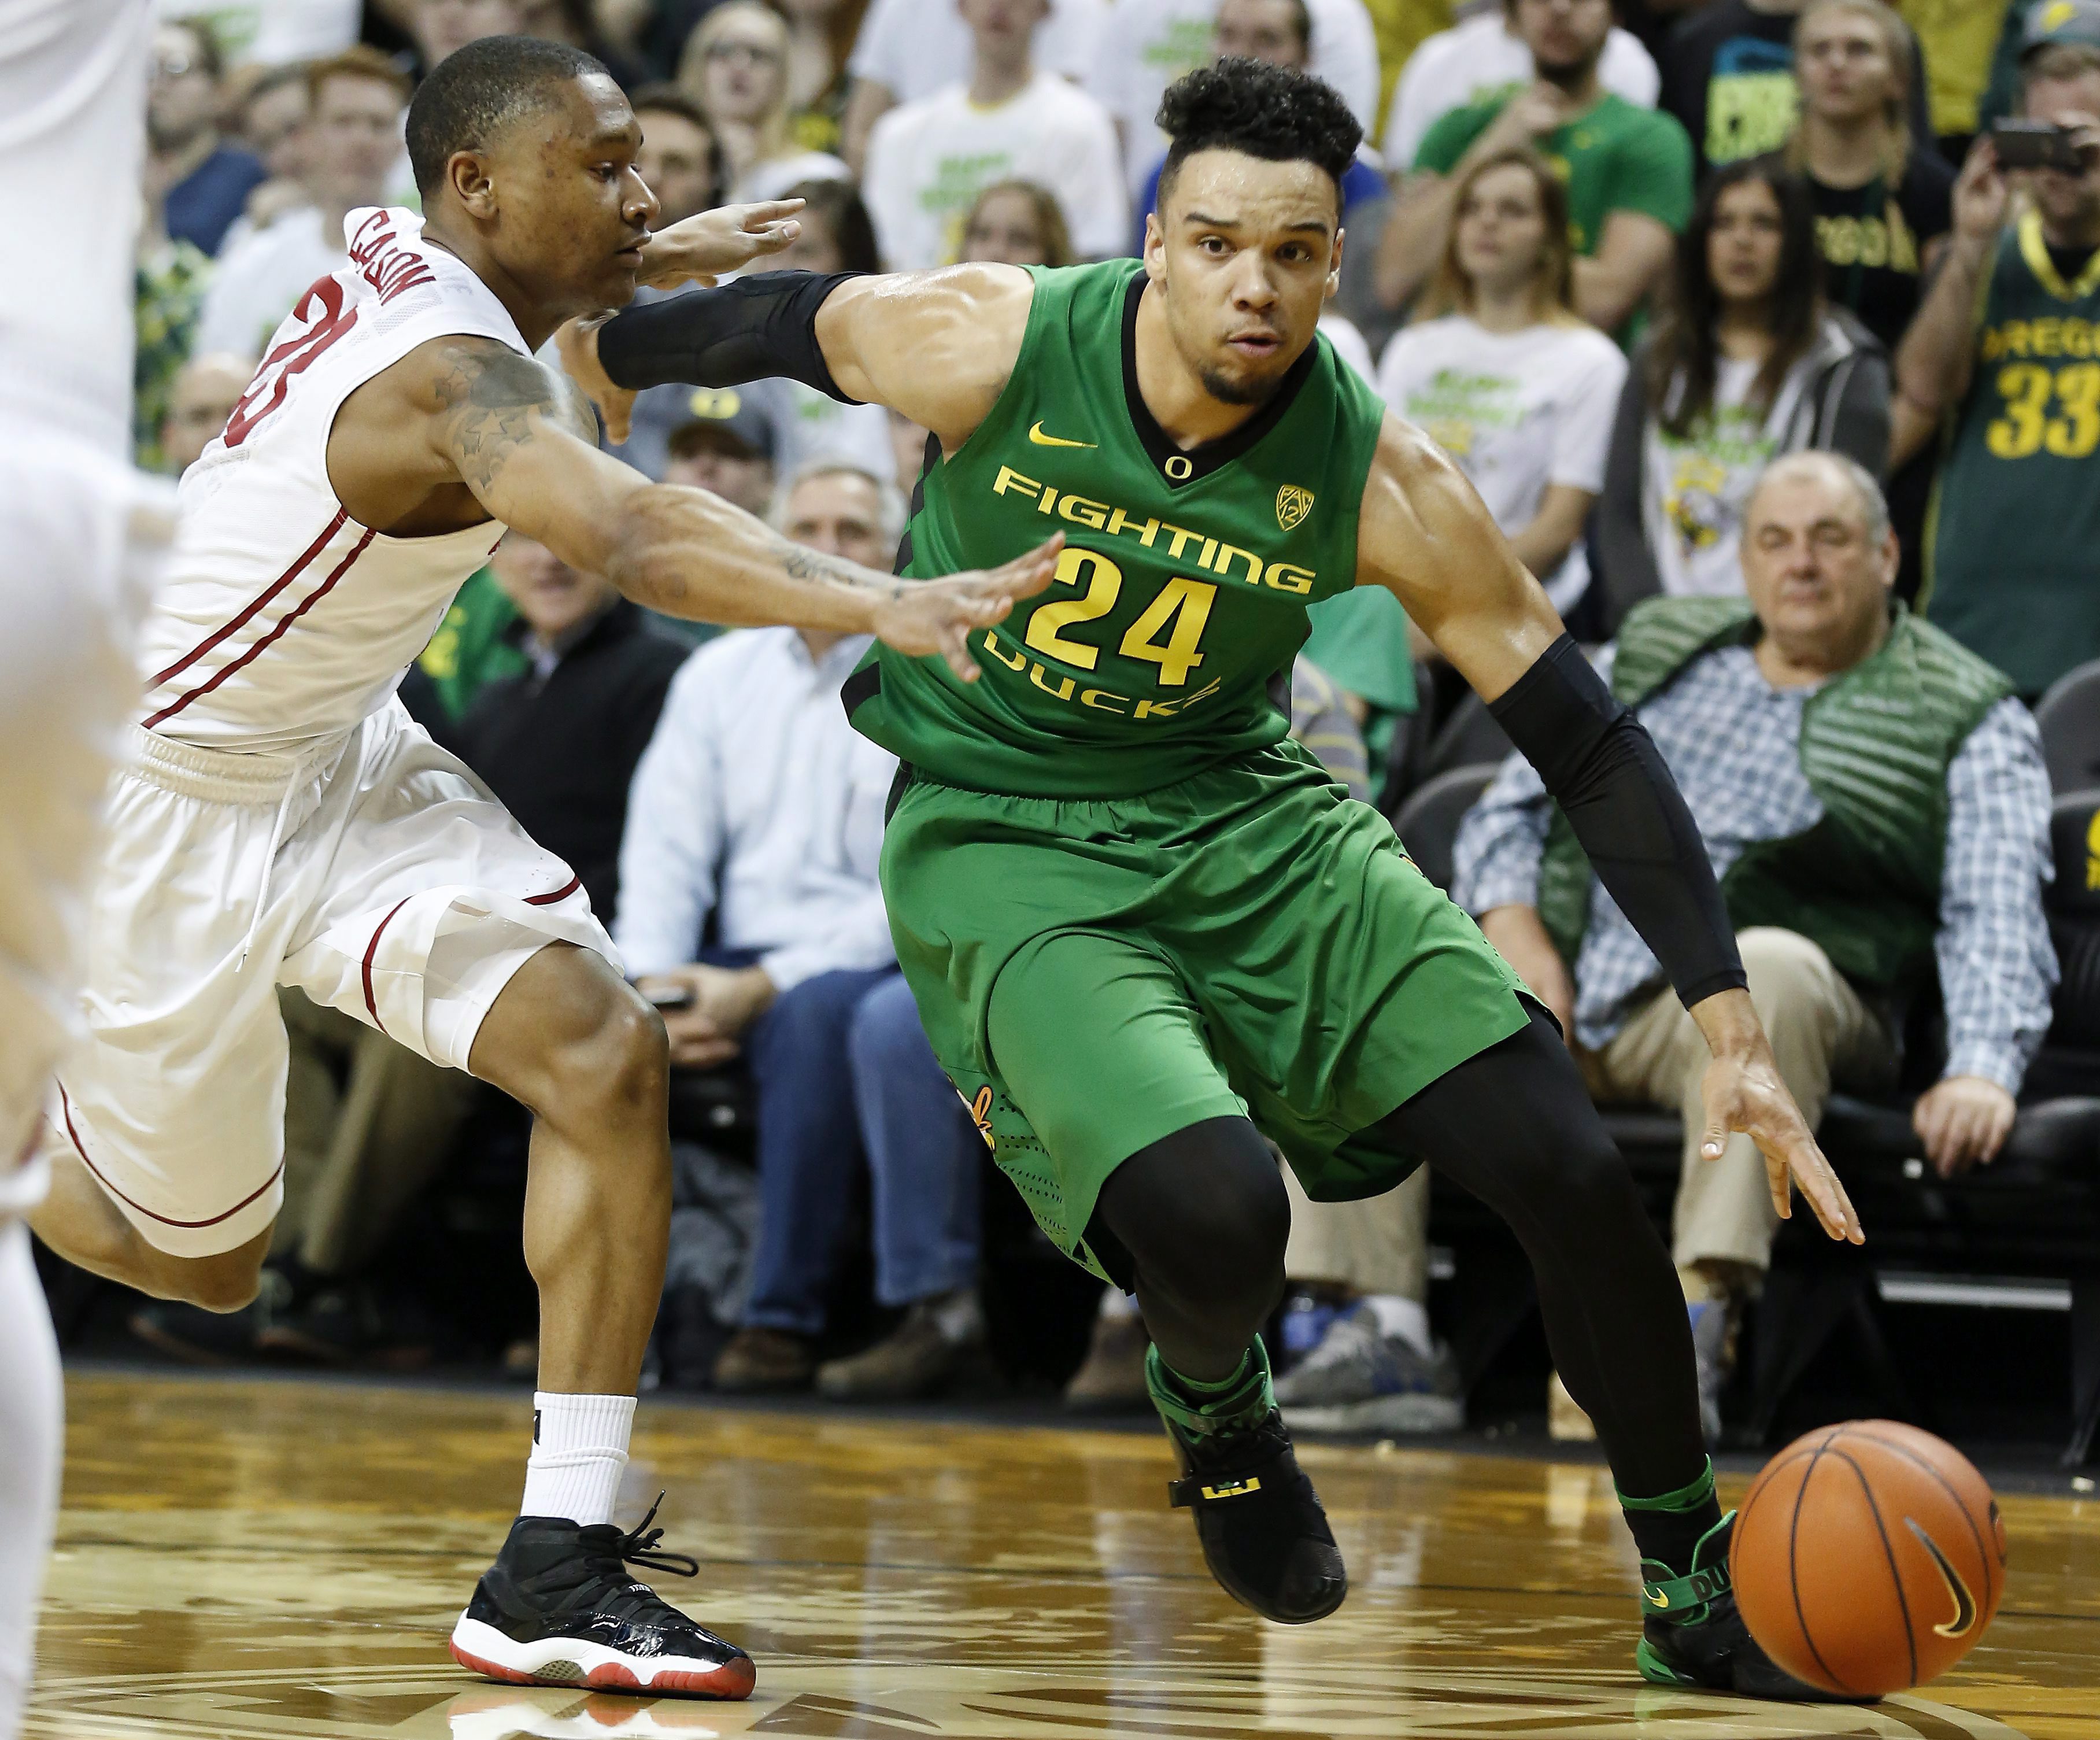 Oregon's Dillon Brooks, right, drives towards the basket against Washington State's Charles Callison, left, during the first half of an NCAA college basketball game Wednesday, Feb. 24, 2016, in Eugene, Ore. (AP Photo/Ryan Kang)